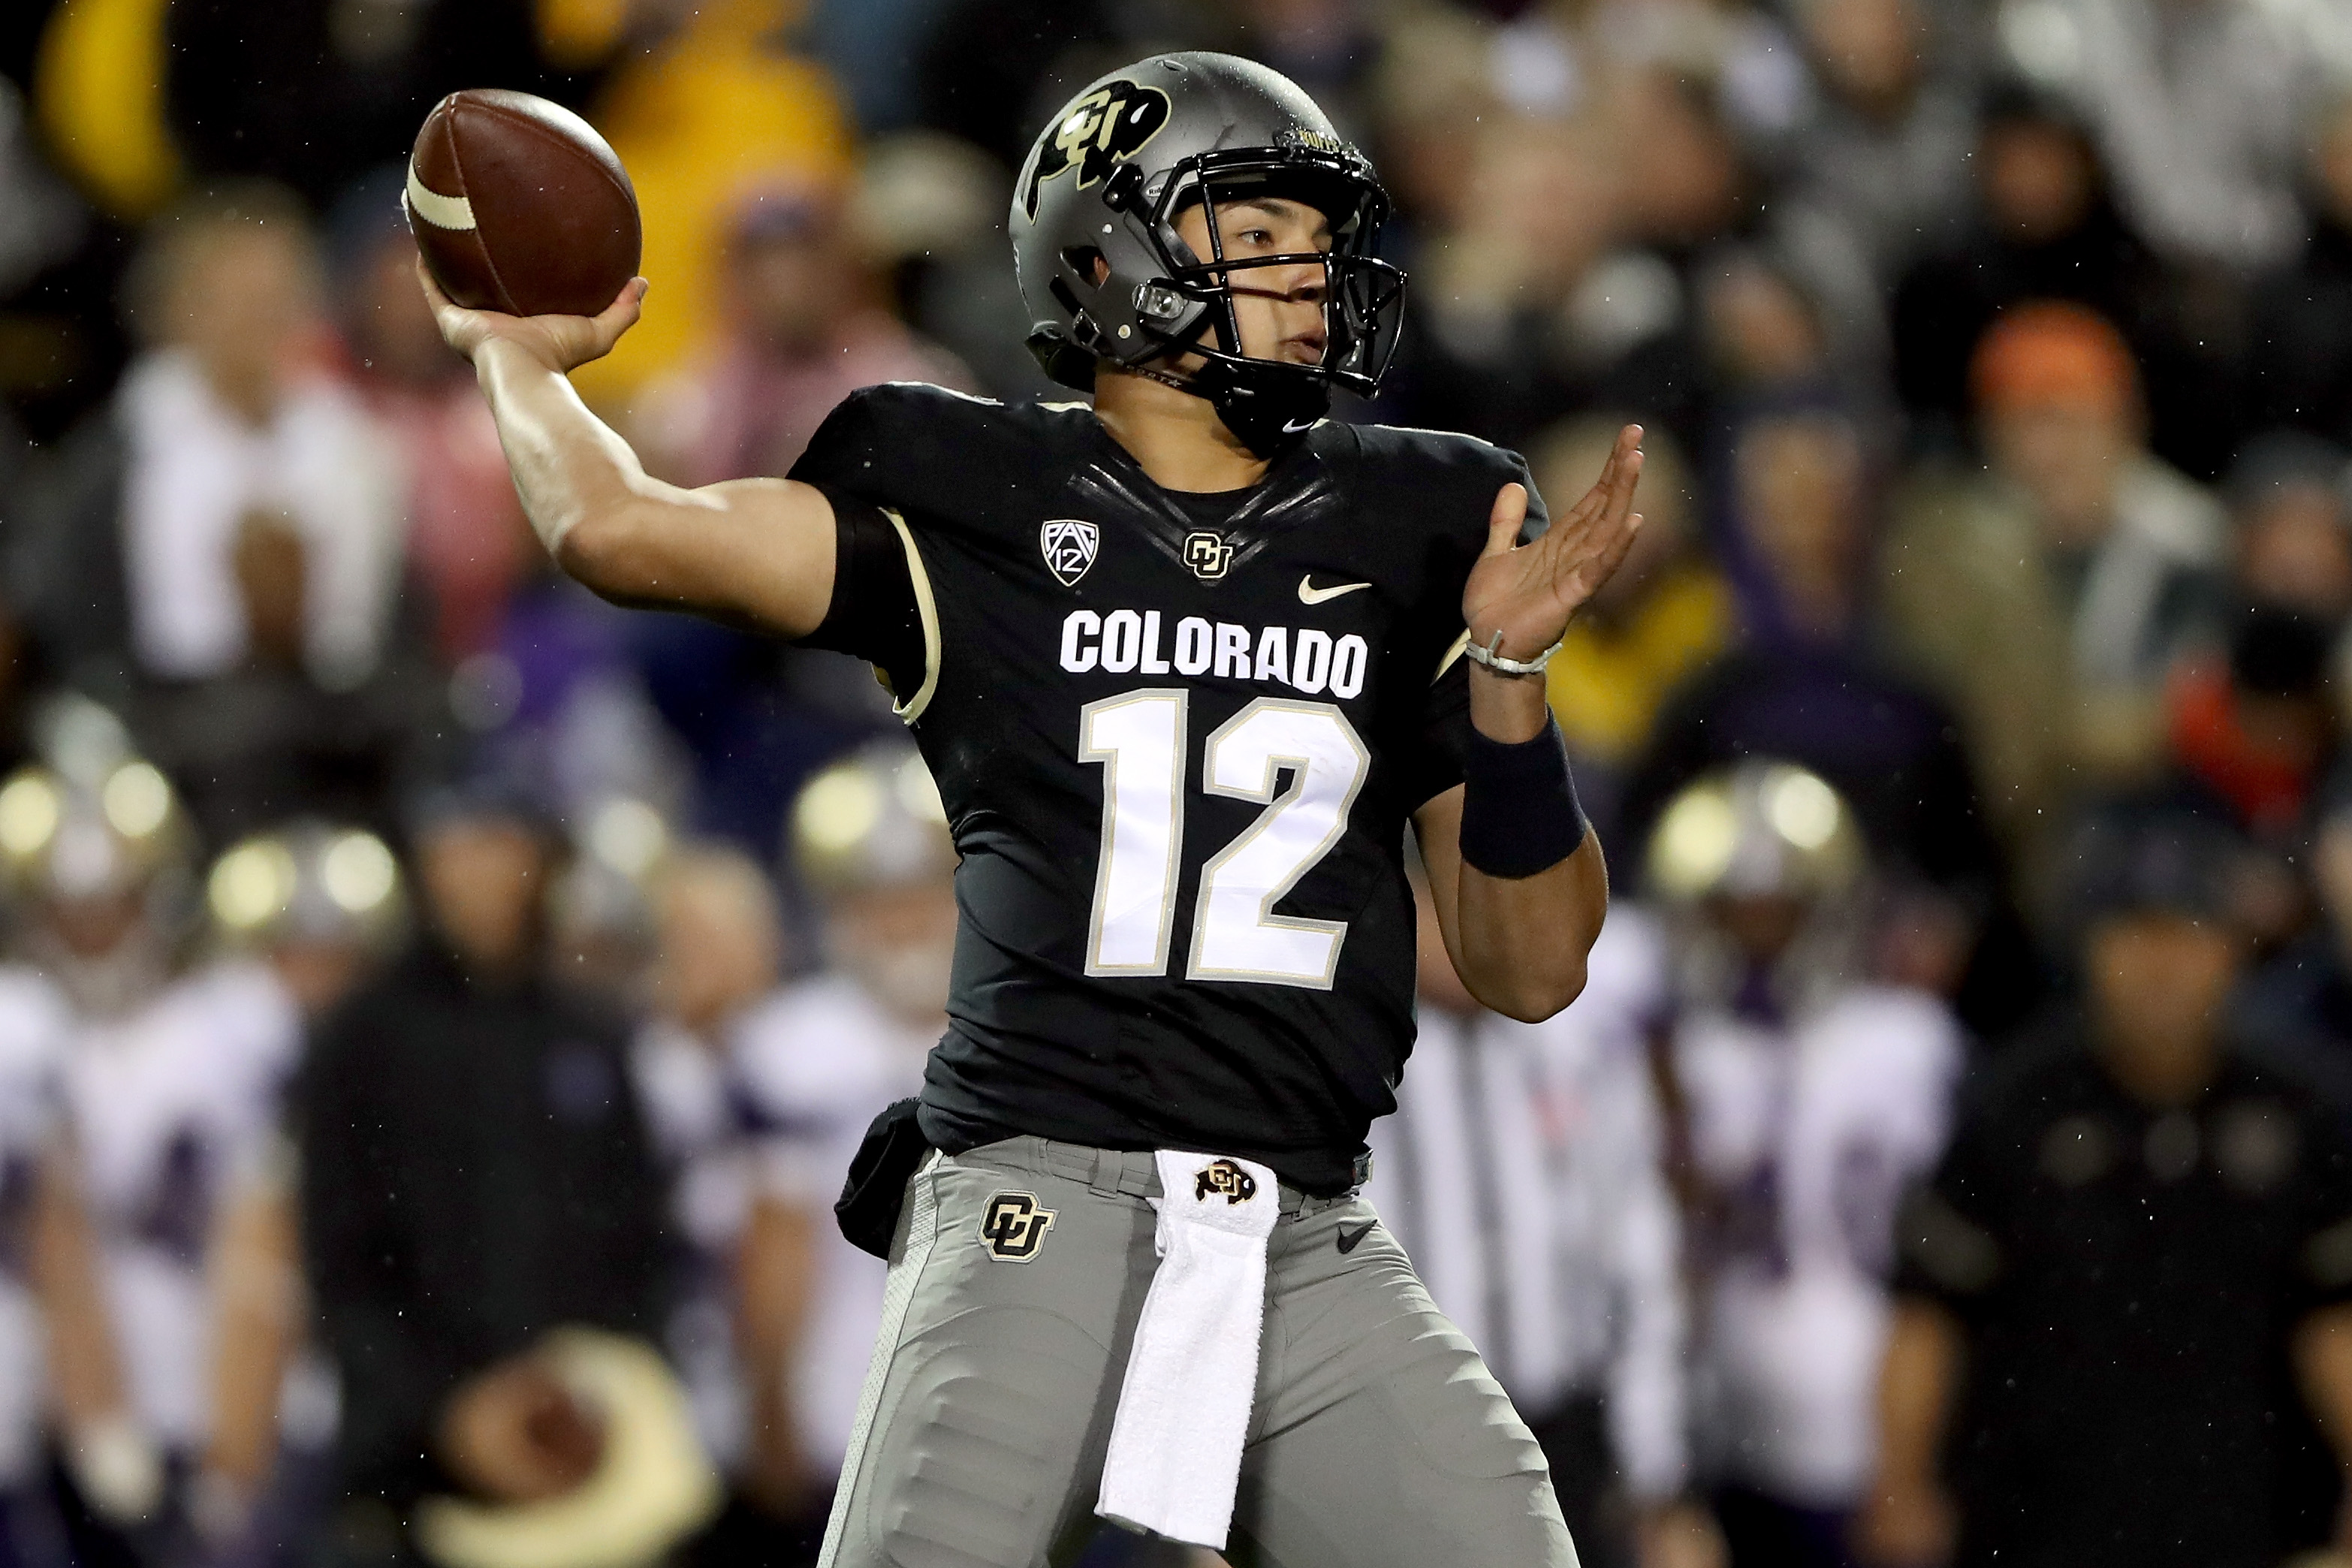 Know Your Opponent UCLA Football vs Colorado Buffaloes